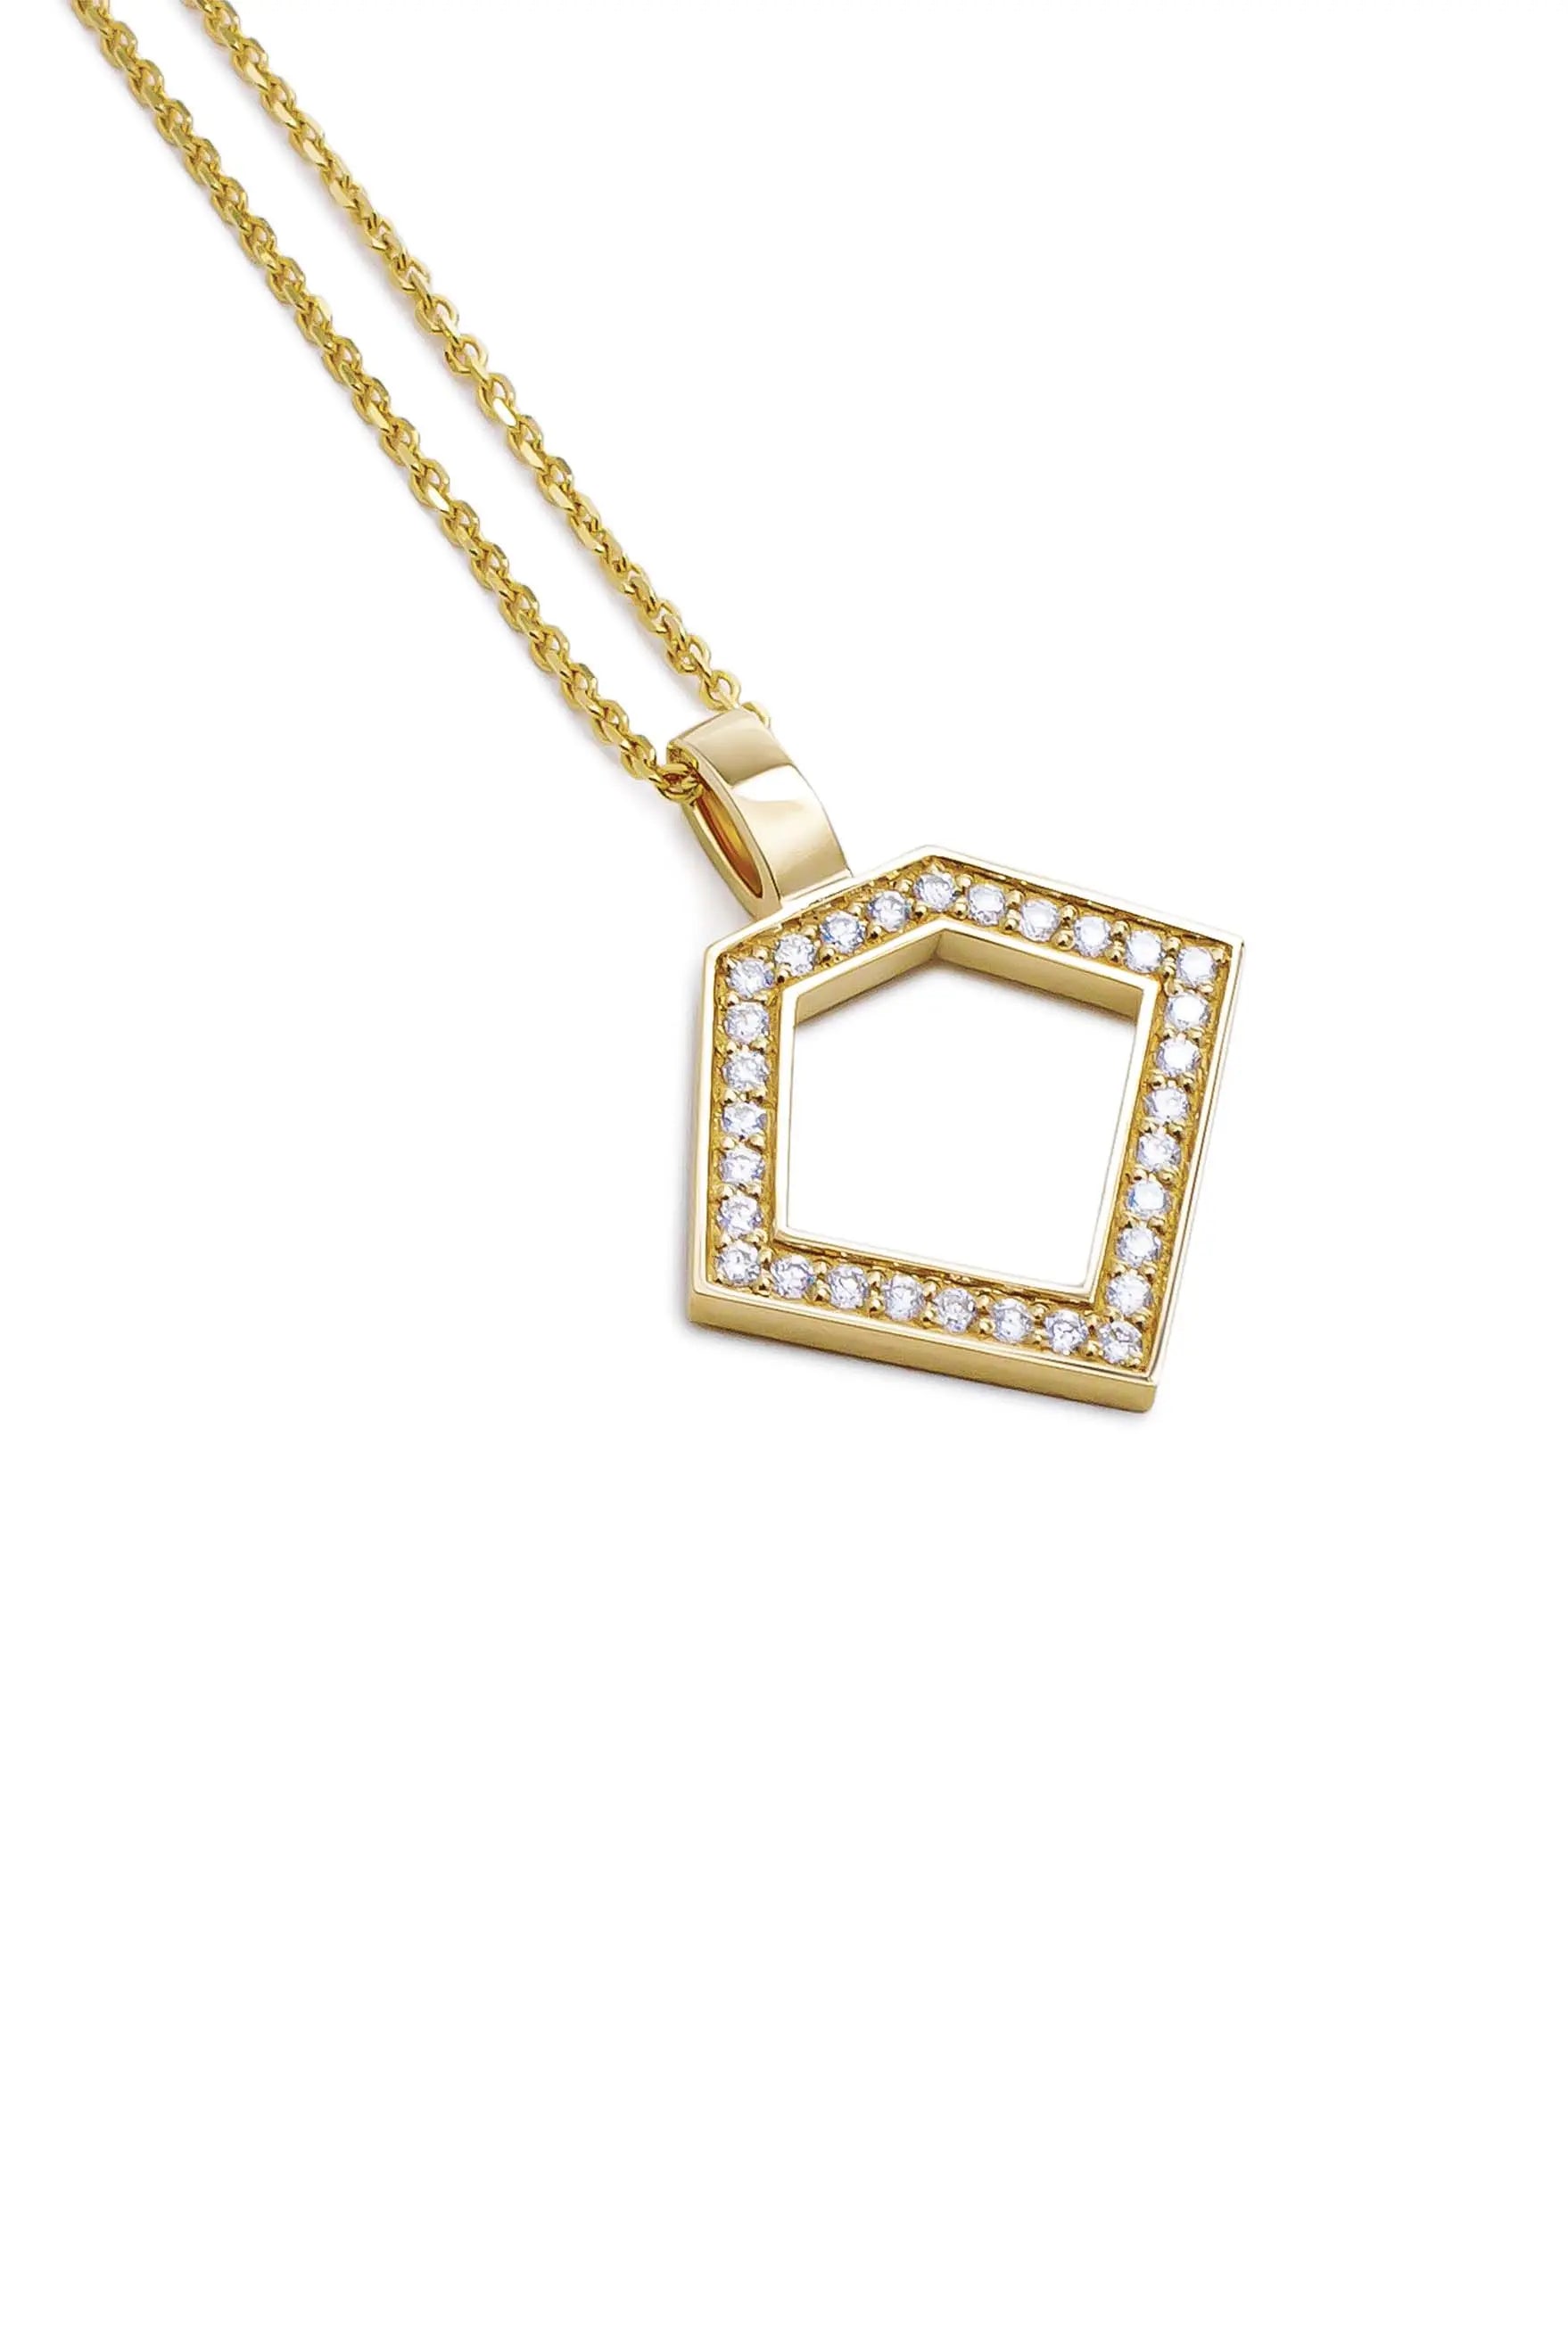 Small cell pendant - CDD Jewelry